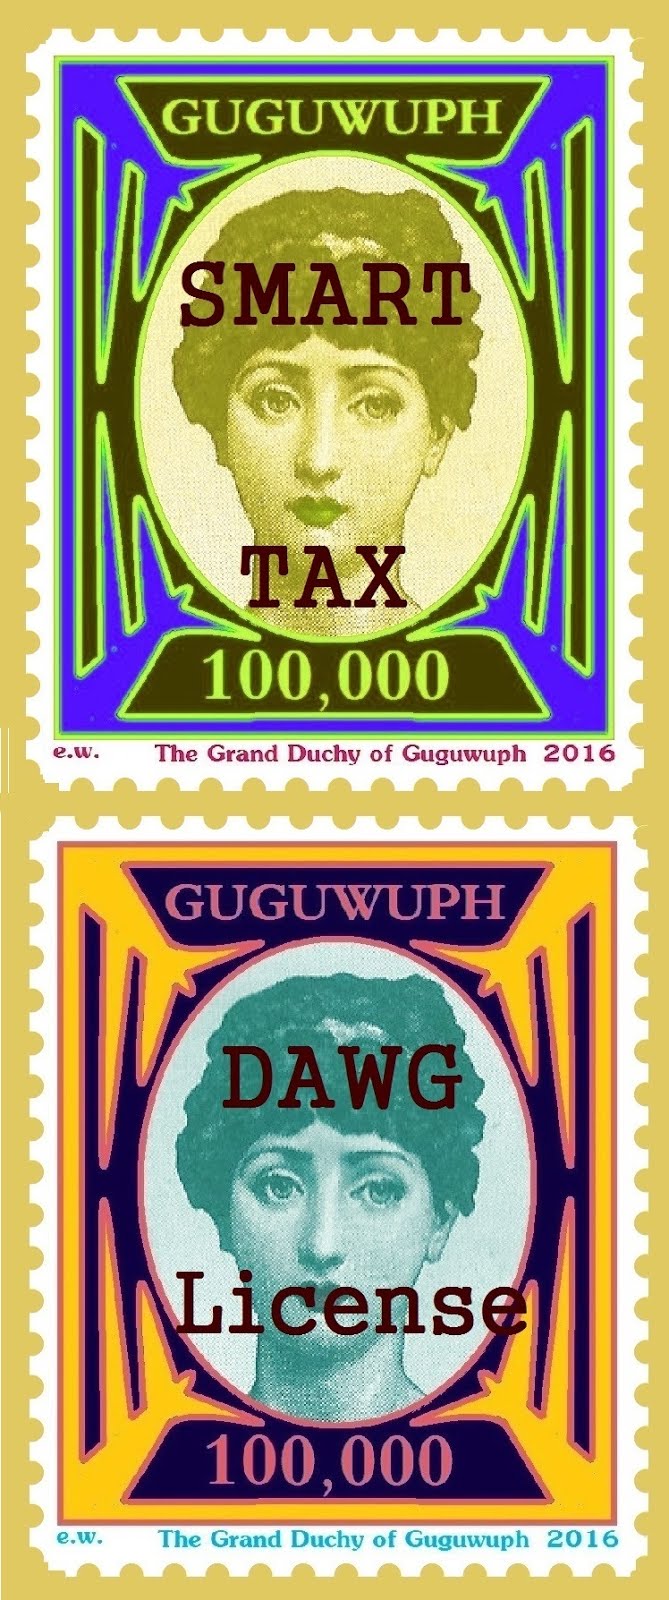 STAMPS OF THE GRAND DUCHY OF GUGUWUPH